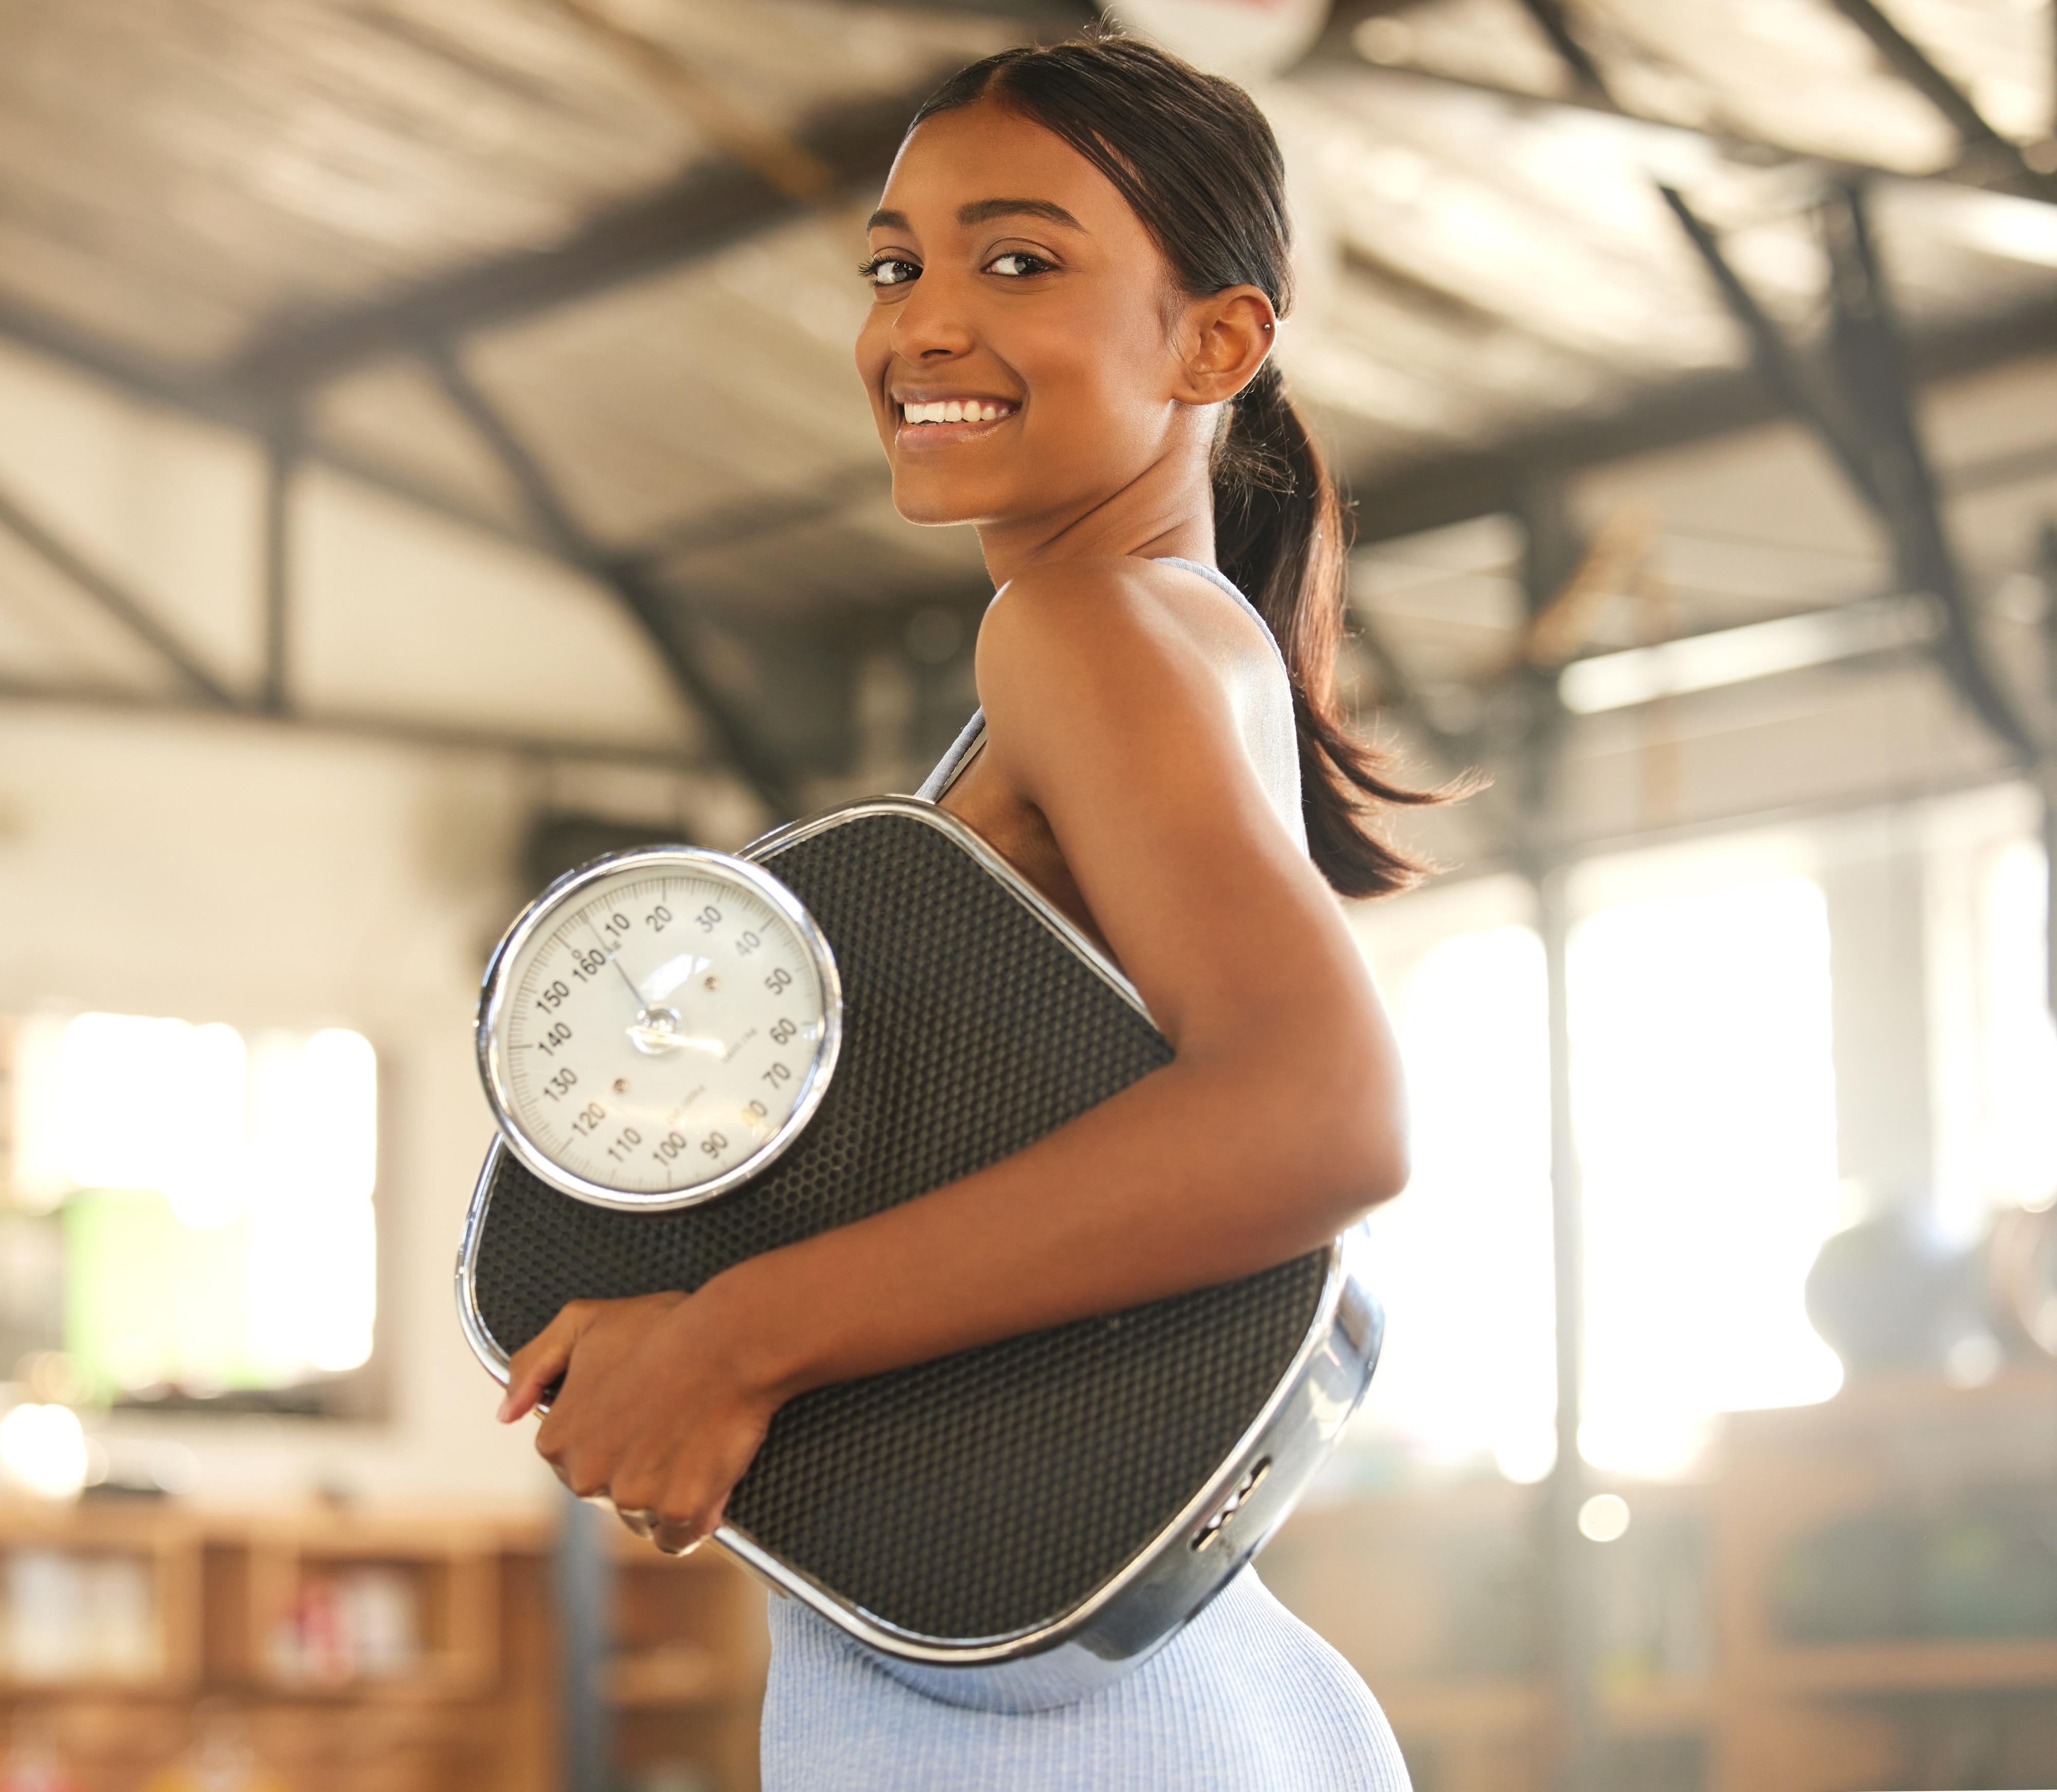 Woman holding a scale under her arm in the gym